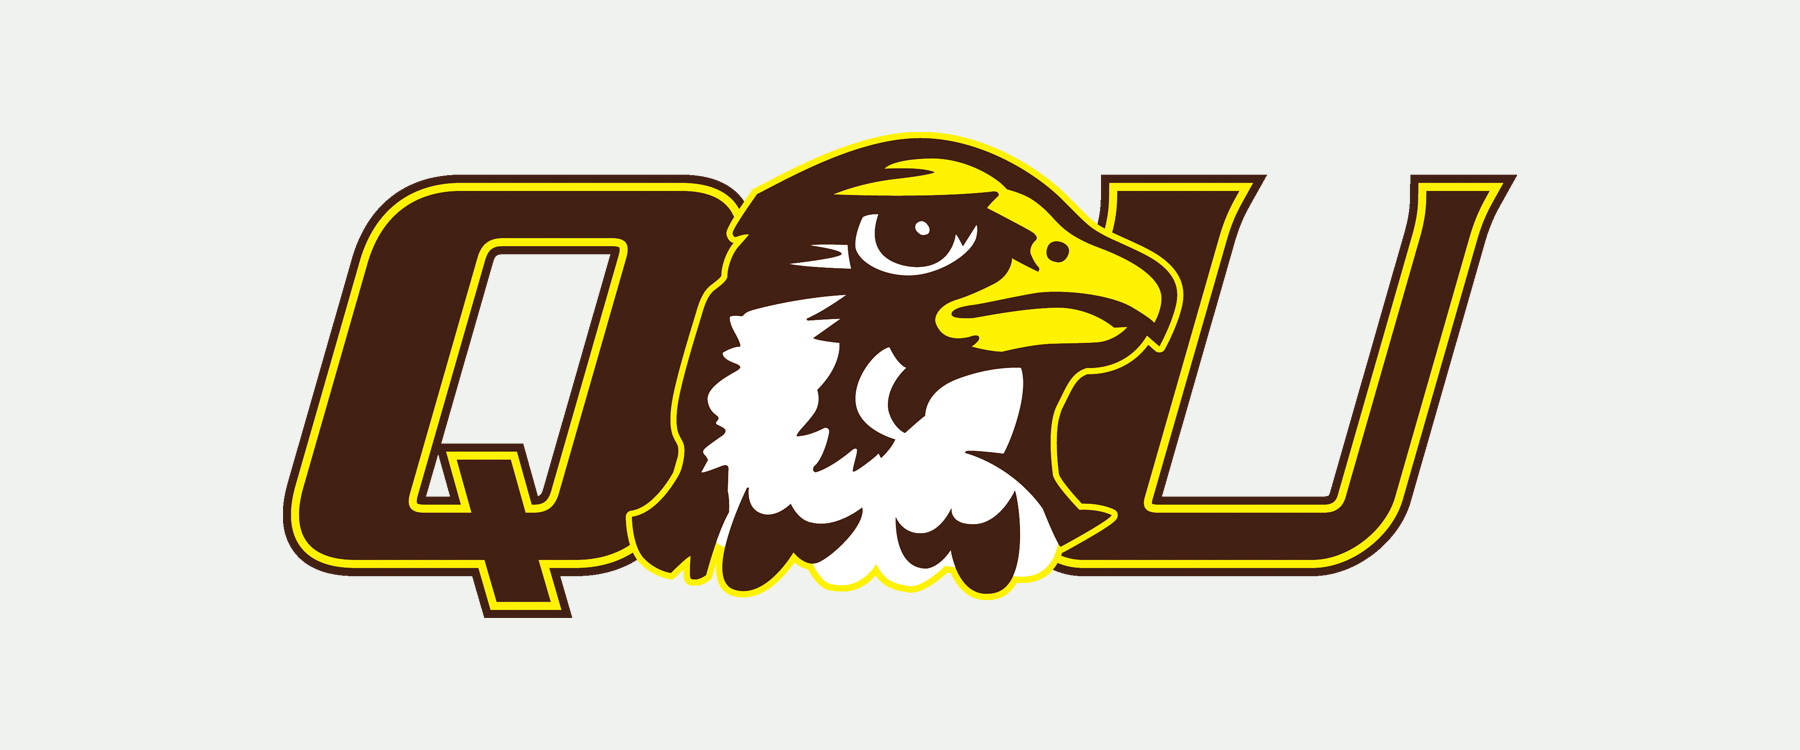 Steve Hawkins Moves Up to D1 After Resigning as Head Coach at Quincy U